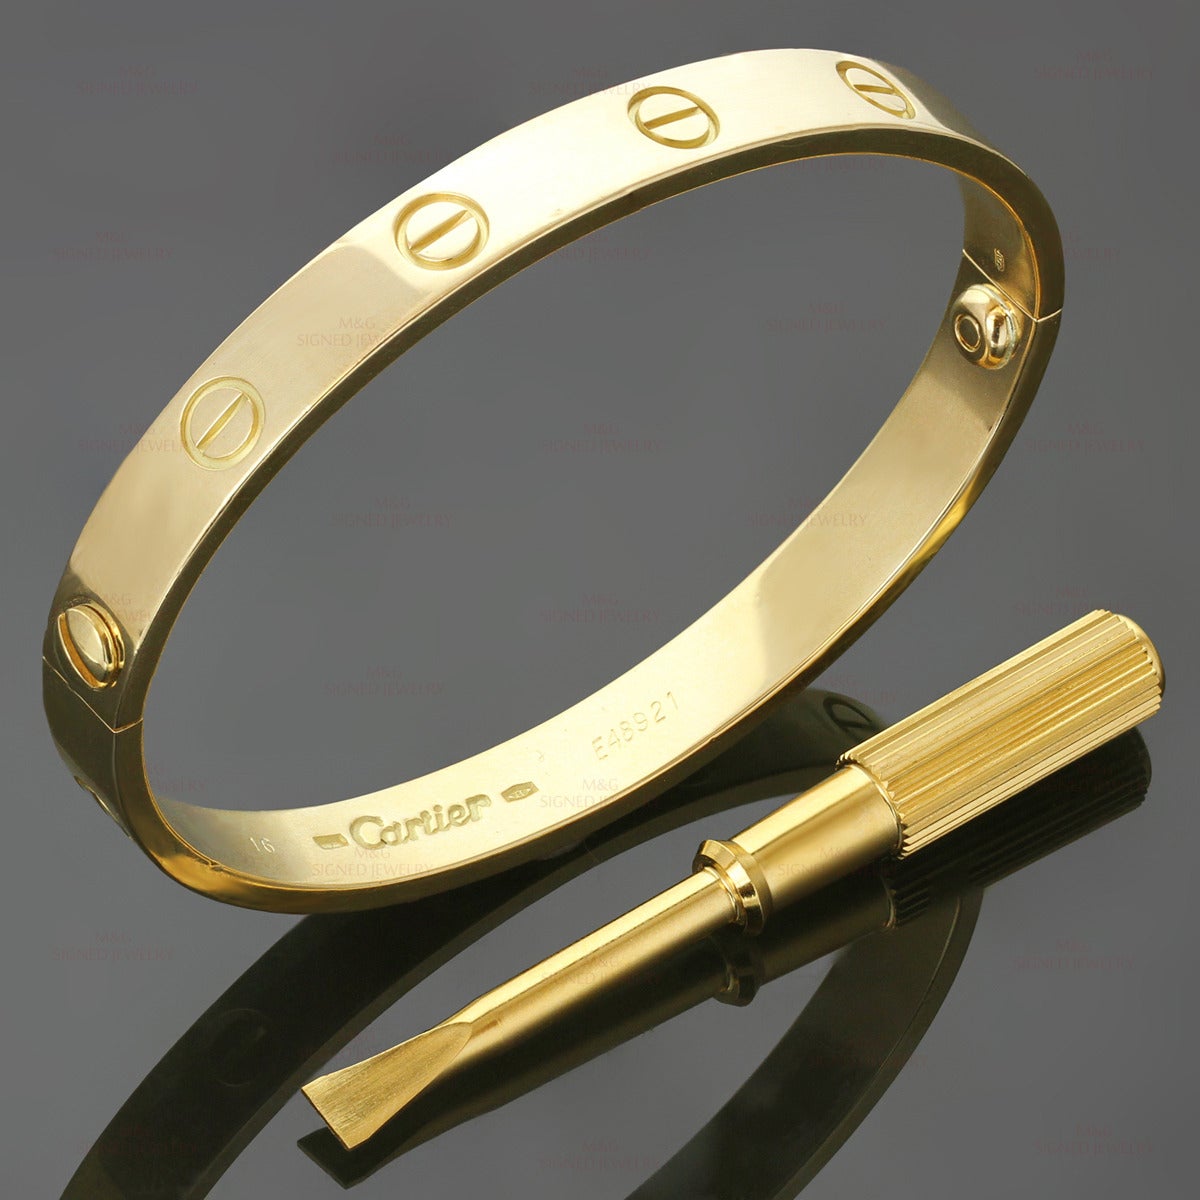 This iconic and timeless bracelet from Cartier's Love collection is finely crafted in 18k yellow gold and completed with the original Cartier screwdriver. This bangle is a size 16. Made in France. Measurements: 0.23